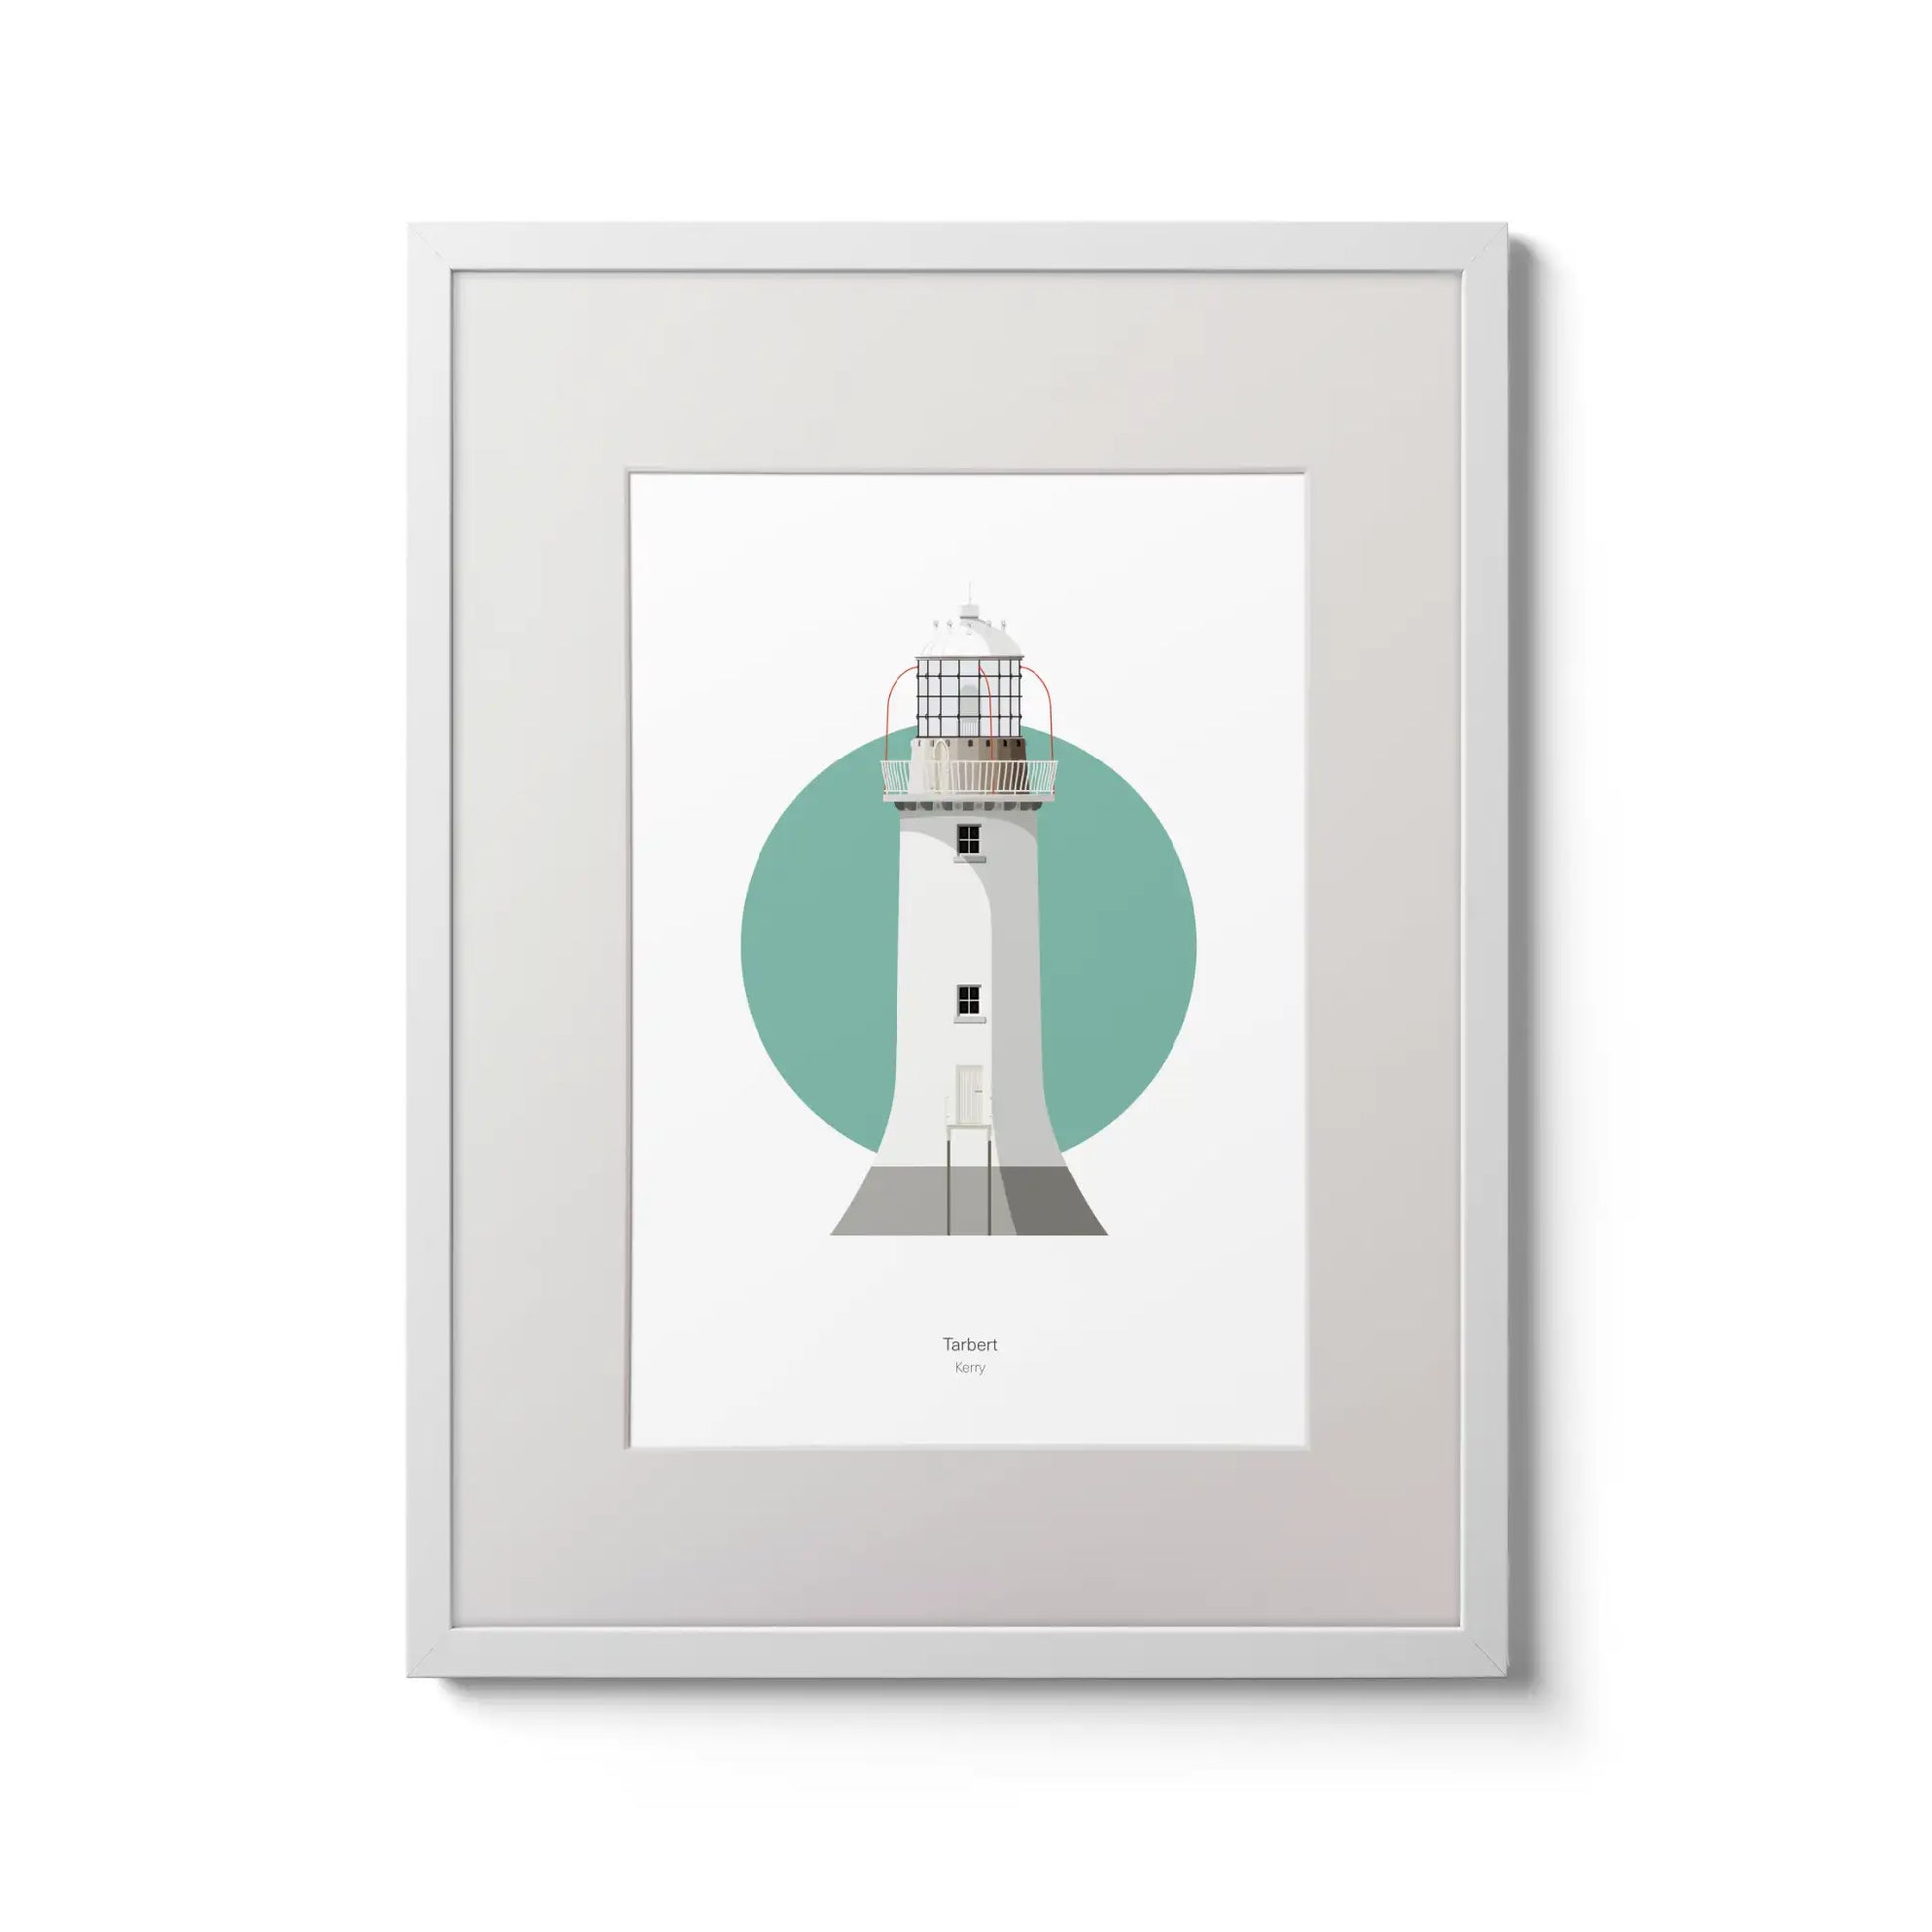 Contemporary wall art decor of Tarbert lighthouse on a white background inside light blue square,  in a white frame measuring 30x40cm.